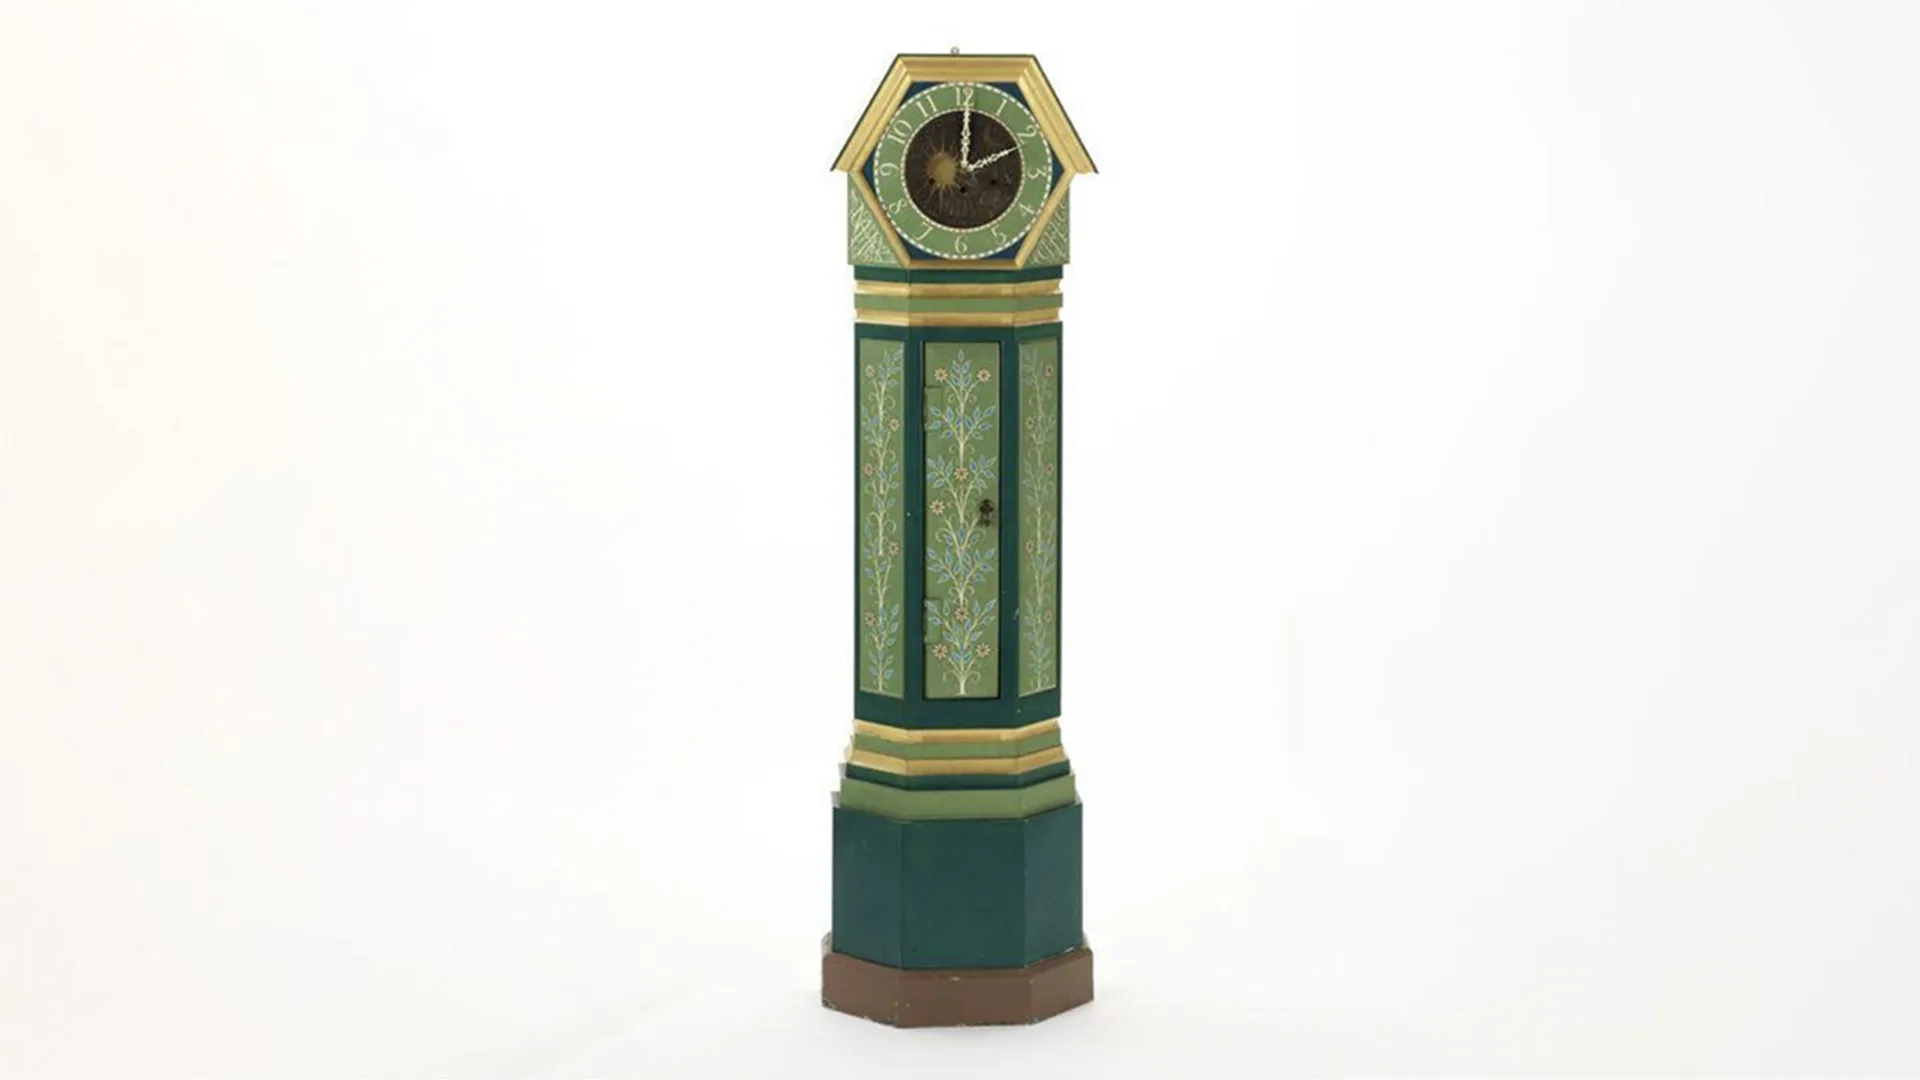 Green and gold decorative free standing clock